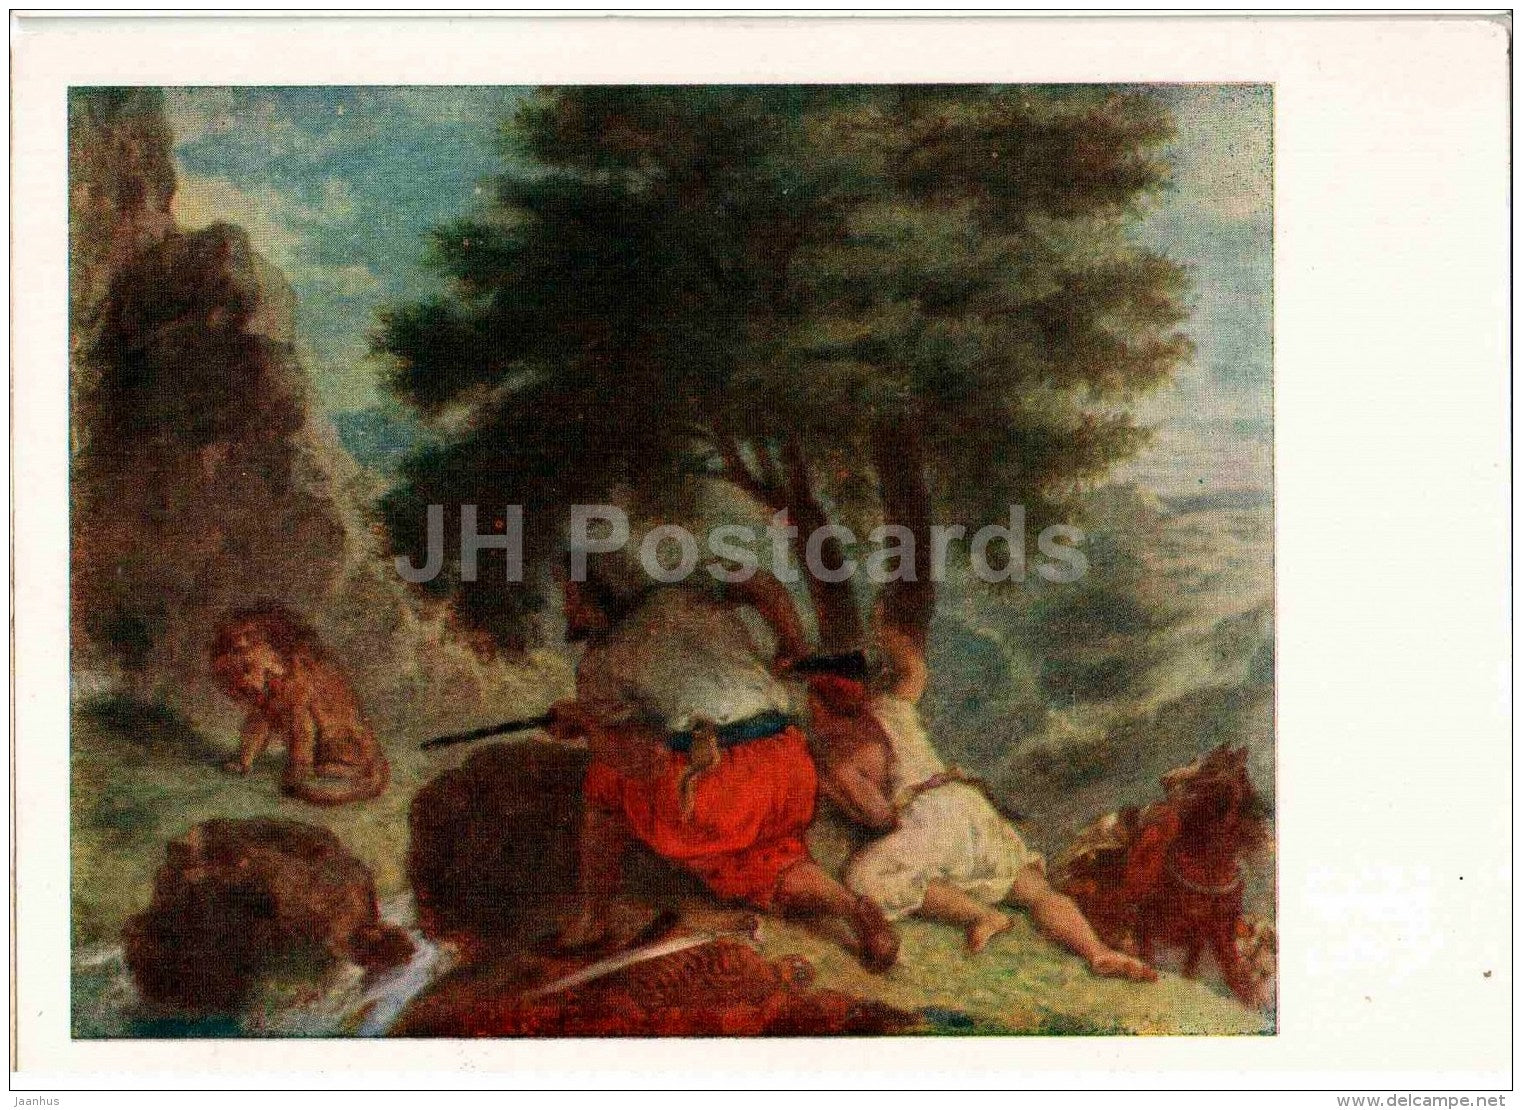 painting by Eugene Delacroix - Lion Hunt in Morocco - French art - 1959 - Russia USSR - unused - JH Postcards